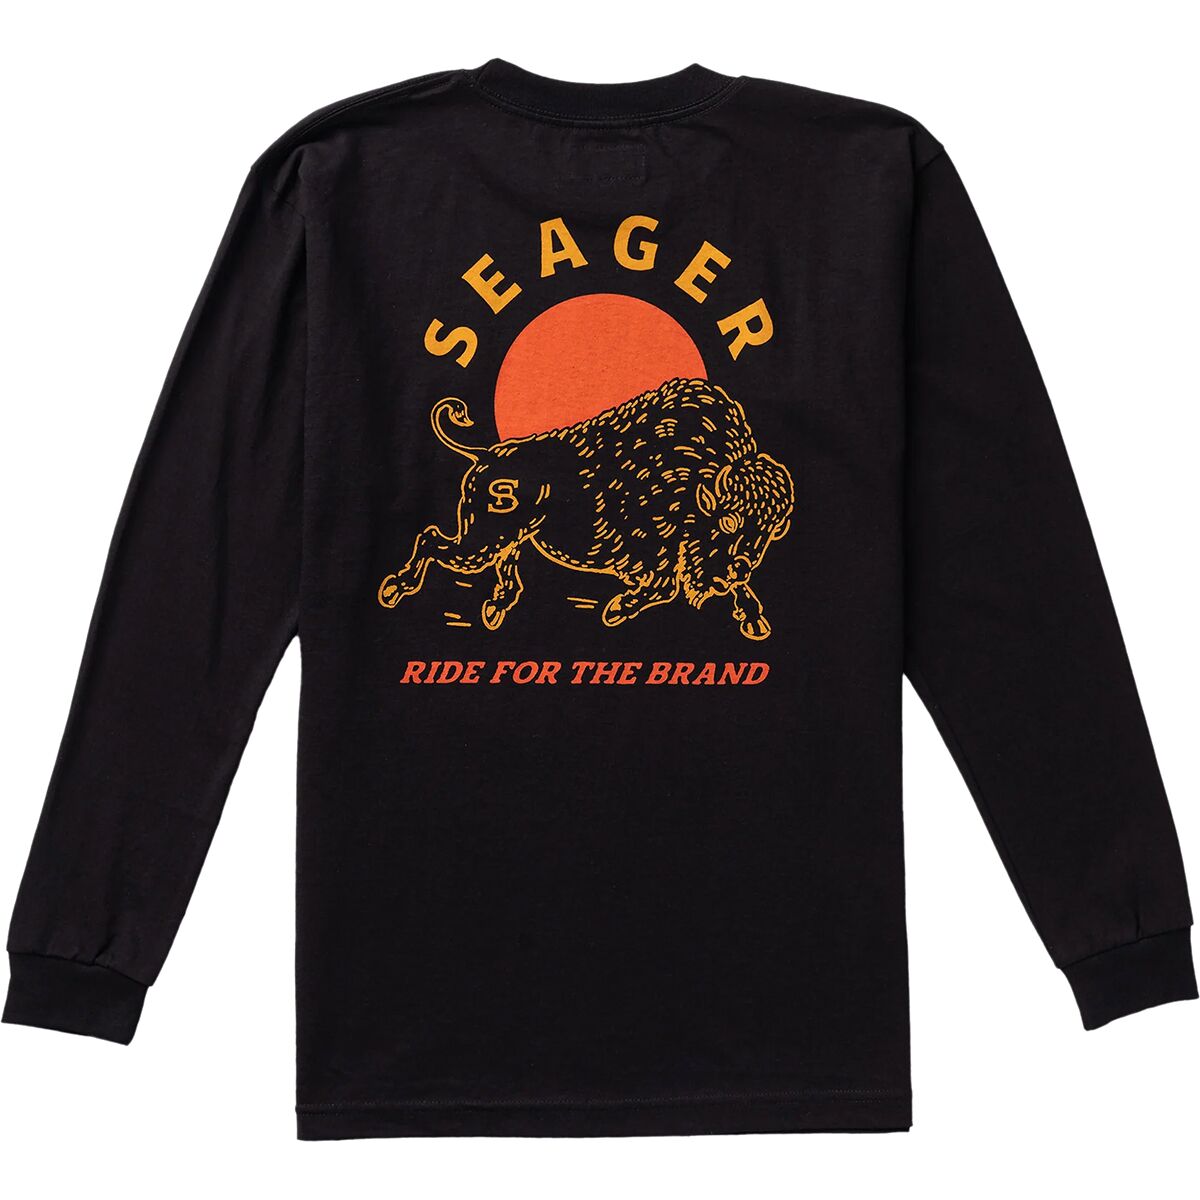 Seager Co. Ride for the Brand Long-Sleeve T-Shirt - Men's